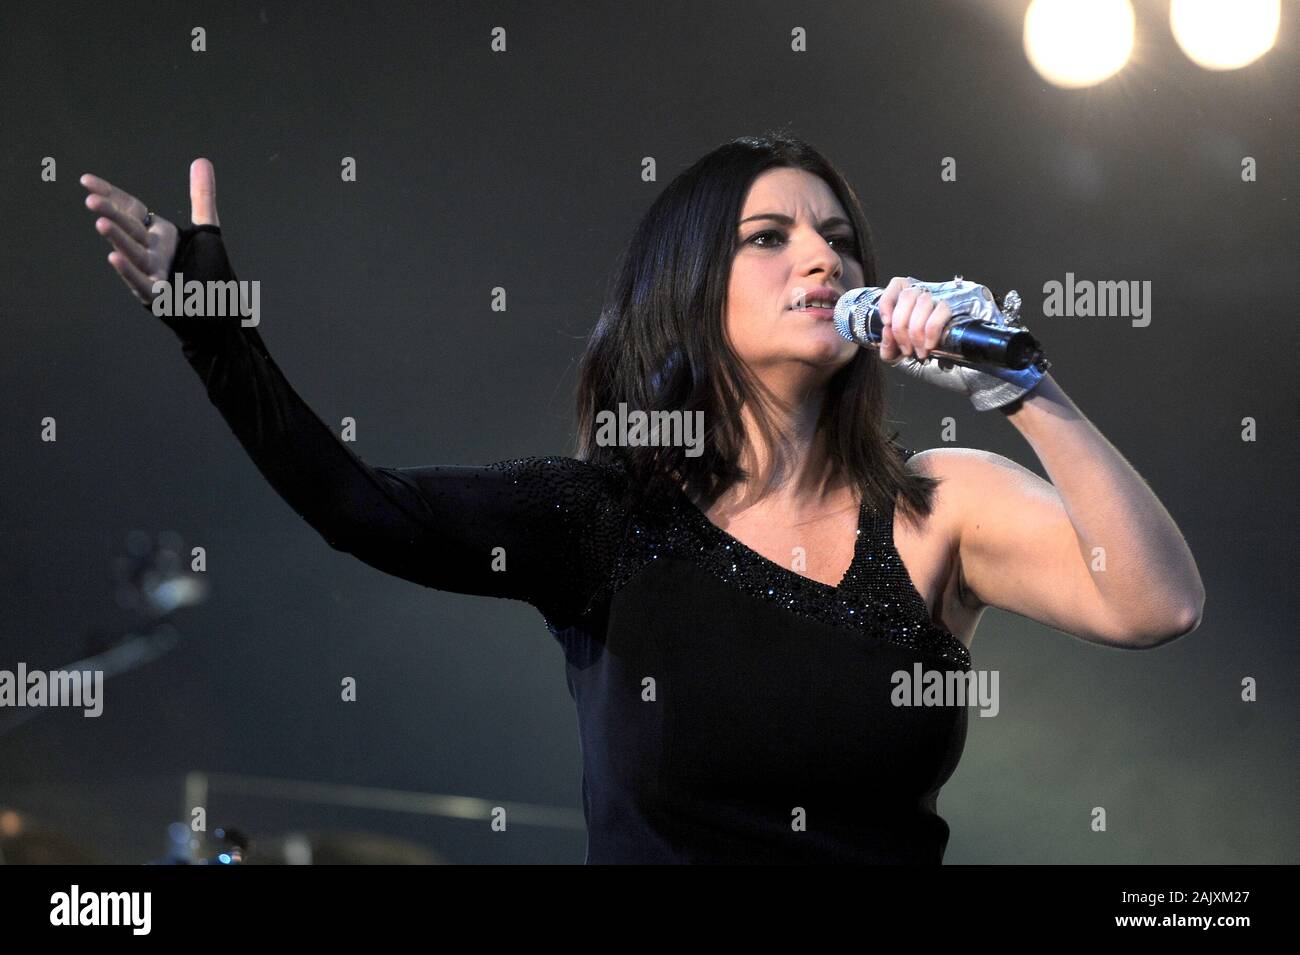 Assago Milano, Italy 12/22/2009 : Laura Pausini during the live concert at the Assago Forum Stock Photo